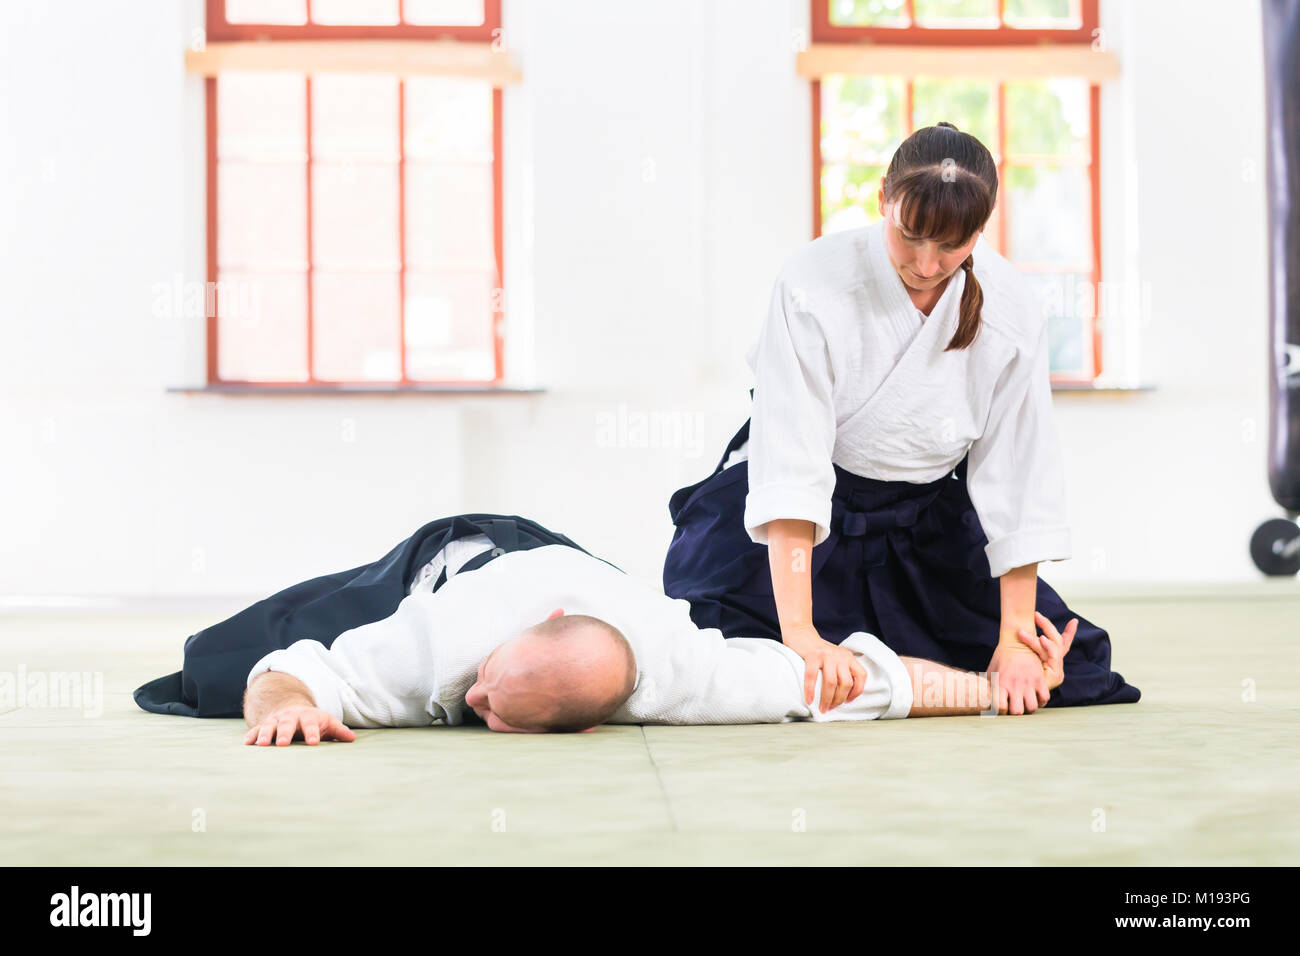 Man and woman fighting at Aikido martial arts school Stock Photo